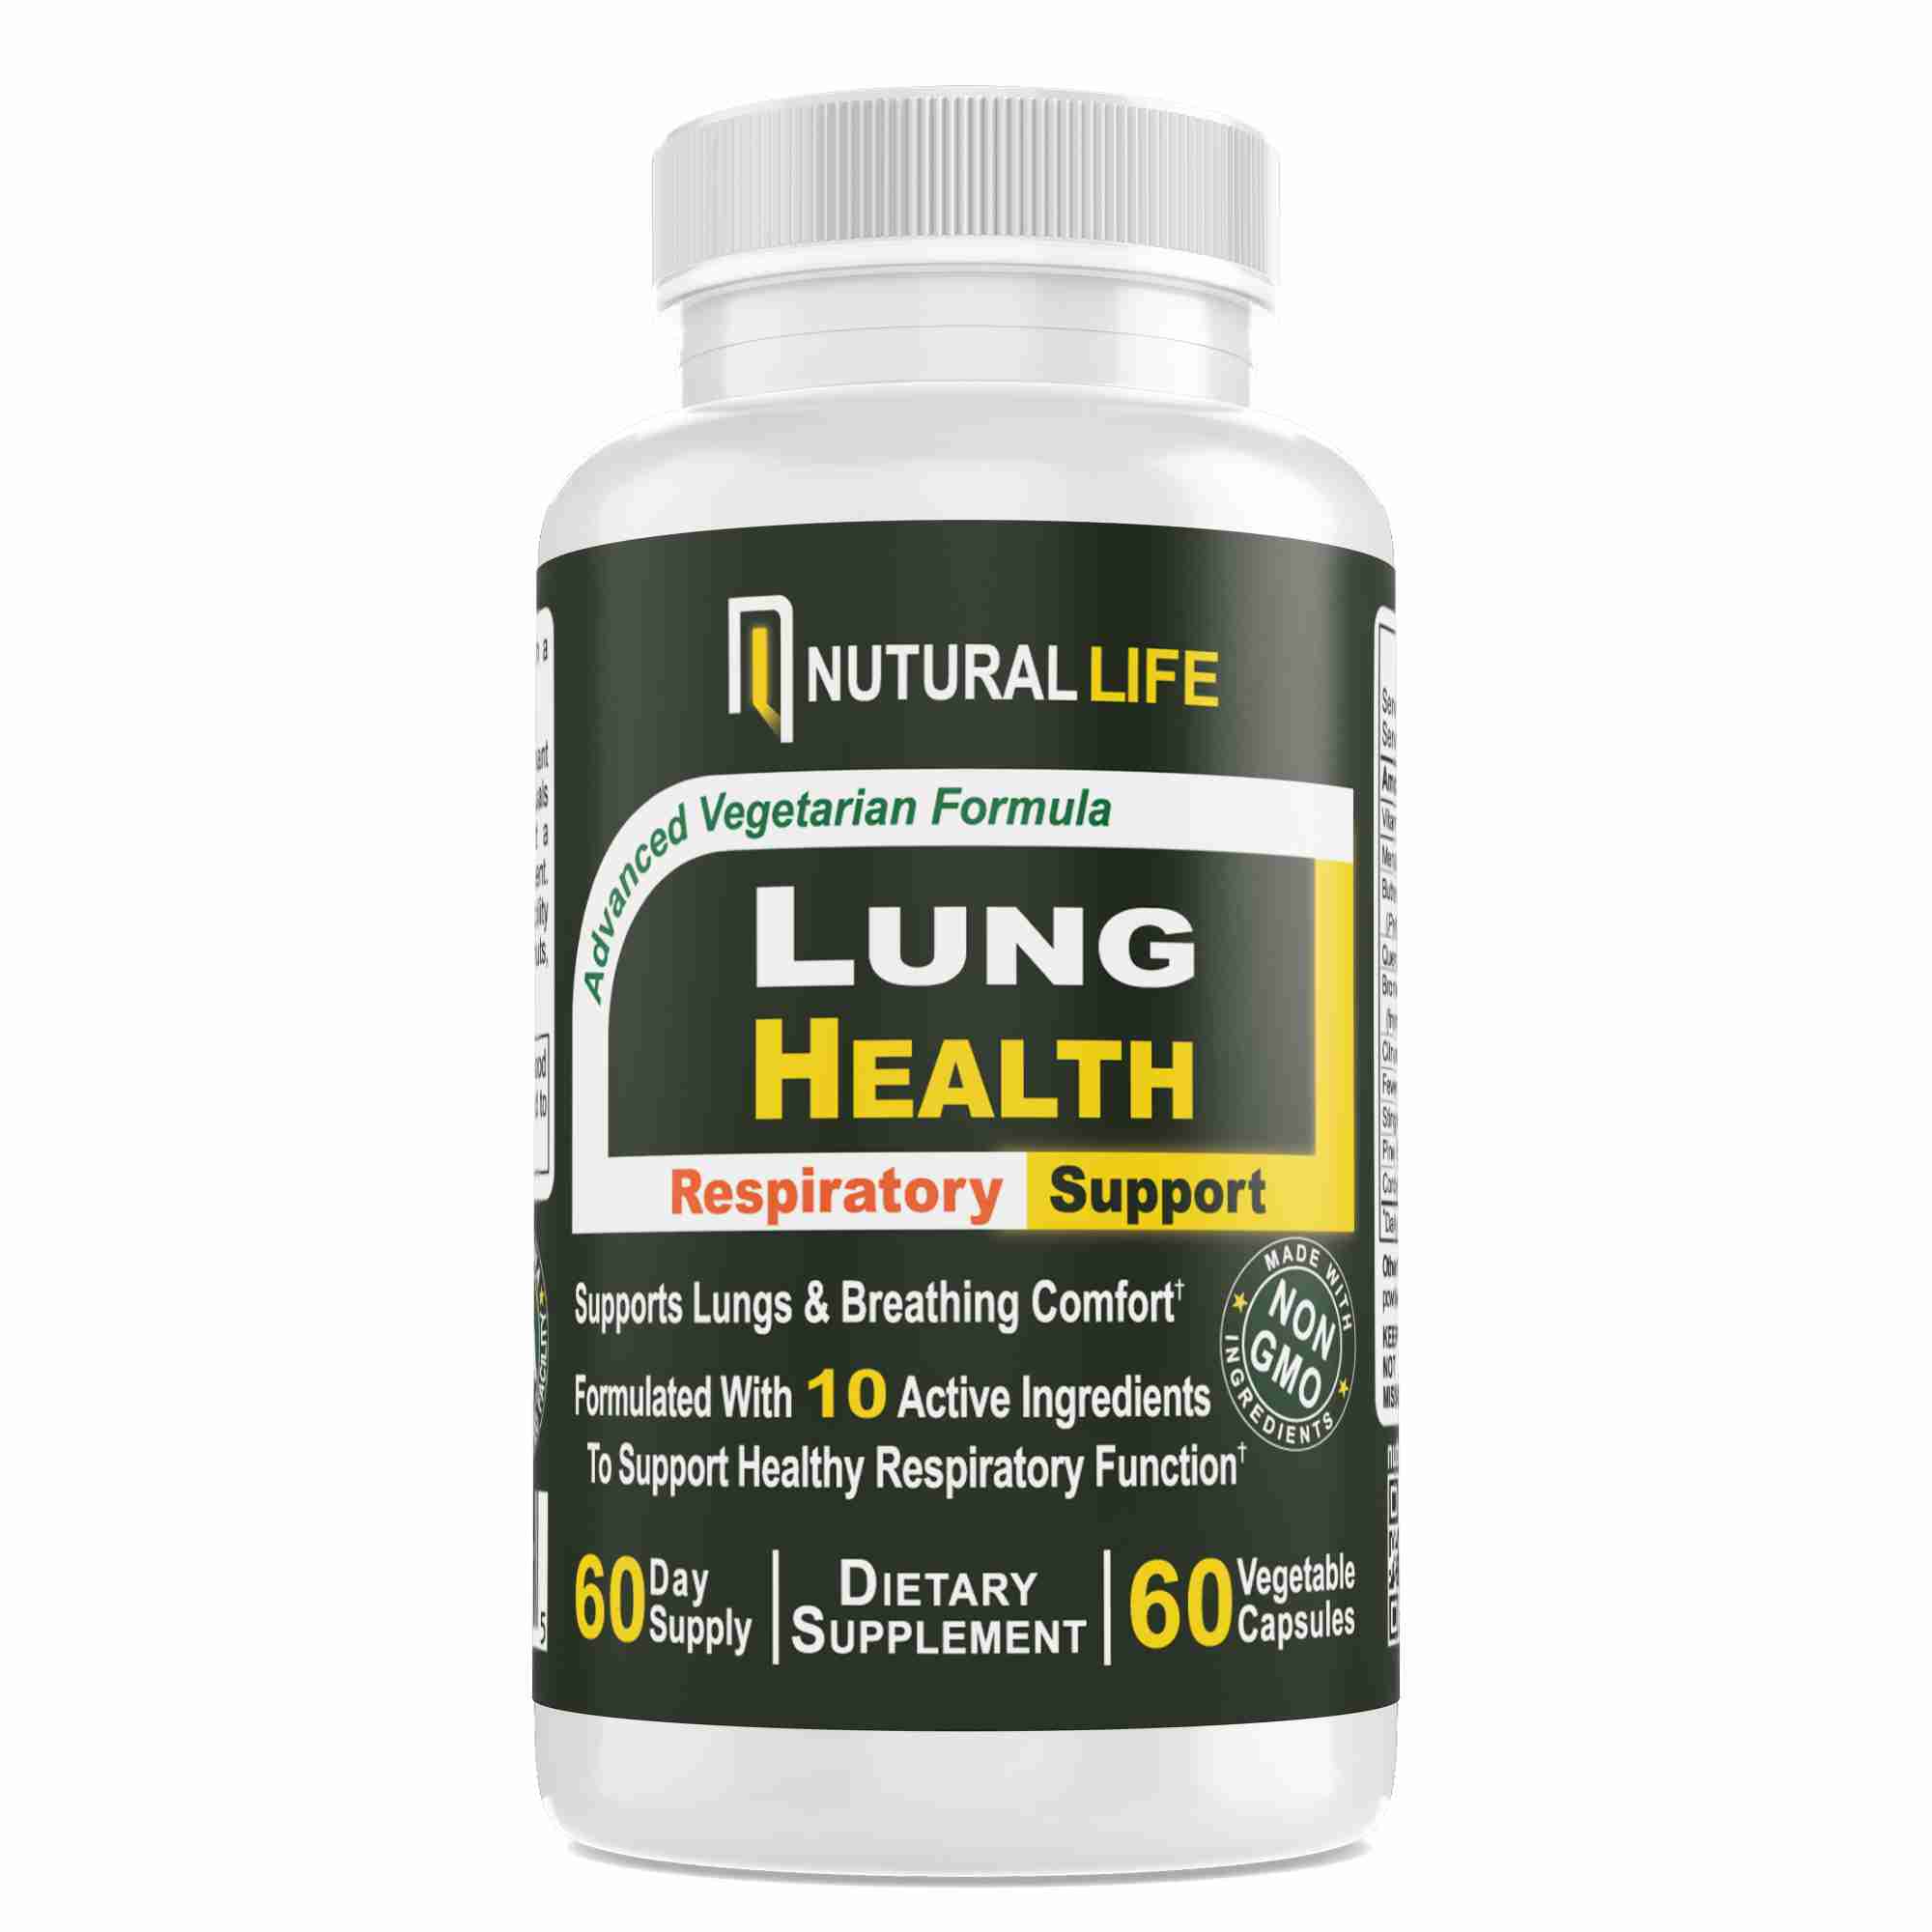 lung-health-supplement with cash back rebate